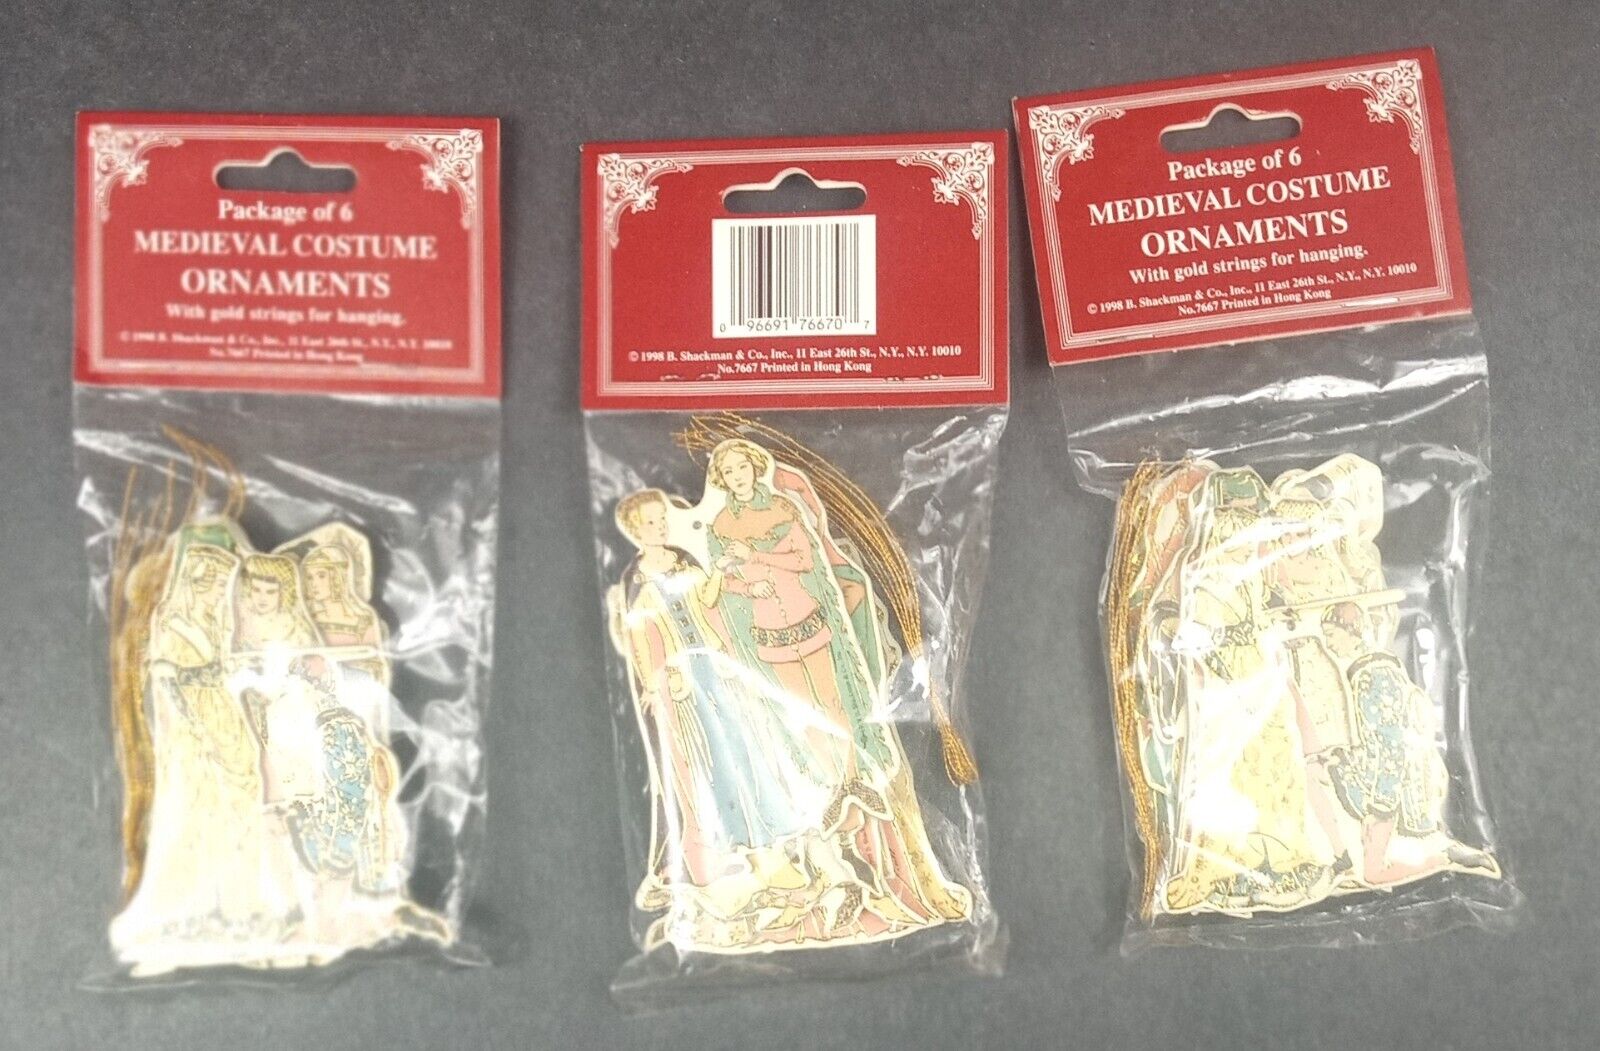 Vintage Shackman Medieval Costume Ornaments Lot of 3 Packs 6 per Pack 1998 hd4